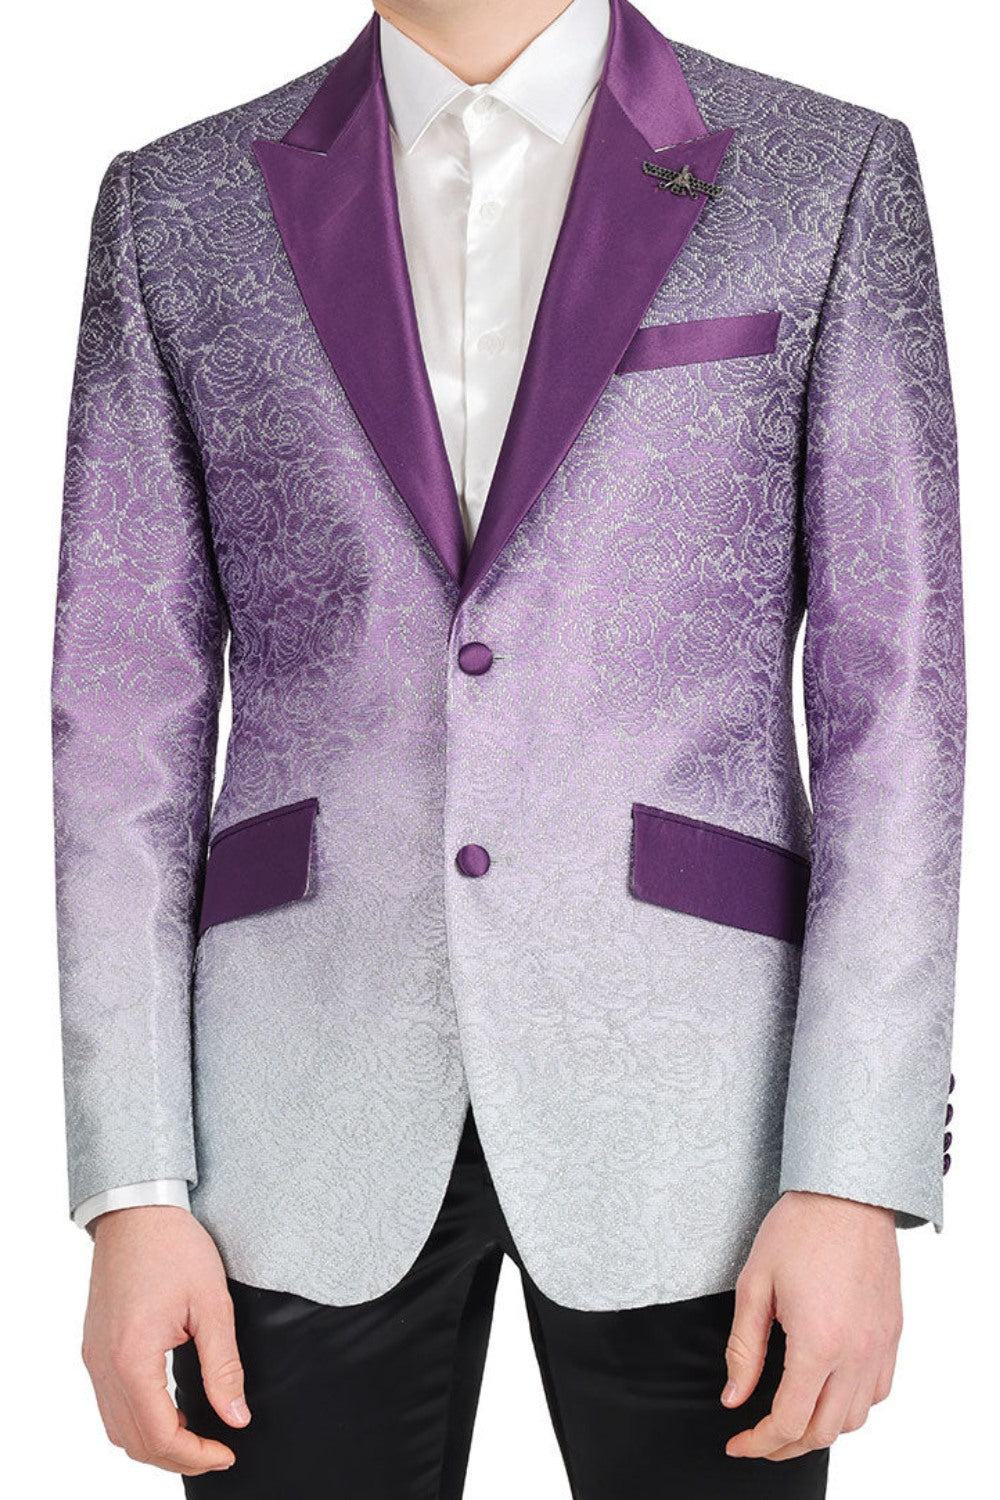 A stylish high school student wearing KCT Menswear's Dazzling Prom Blazer, showcasing its stunning two-tone purple fading effect, silver floral pattern, and gradient design - perfect for a memorable prom night.